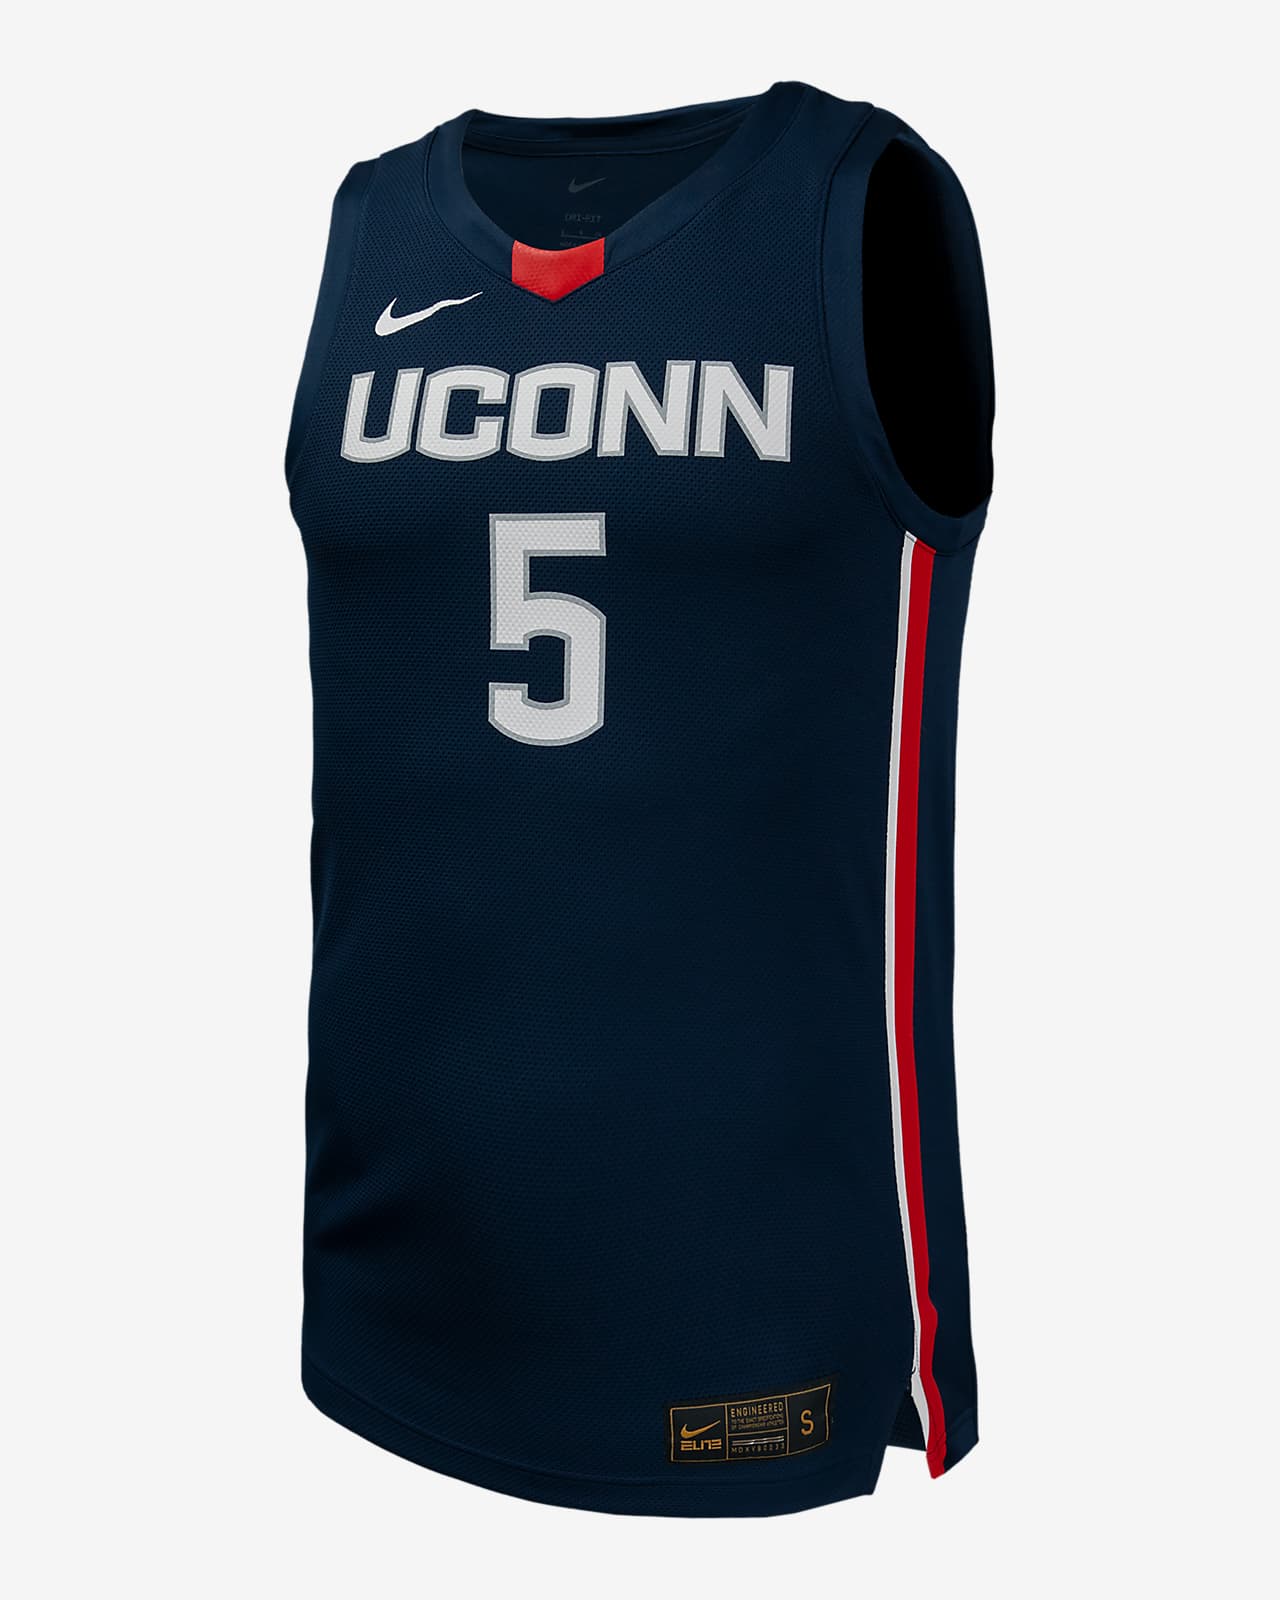 Paige Bueckers UConn 2023/24 Nike College Basketball Jersey